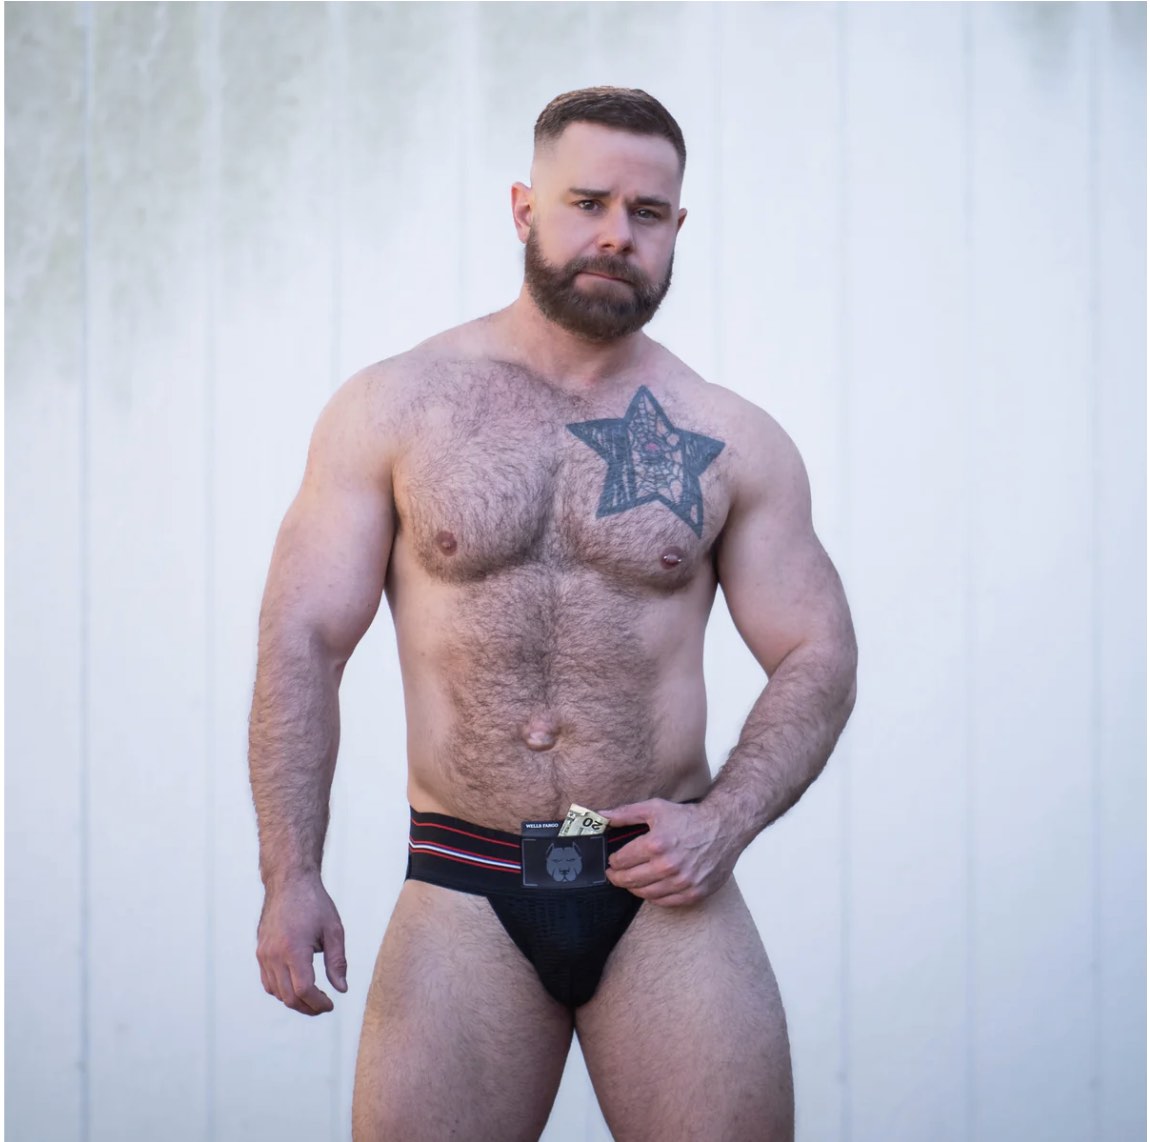 A model wearing the Gruff Pup Pocket Jockstrap with money sticking out of the front pocket, front view.